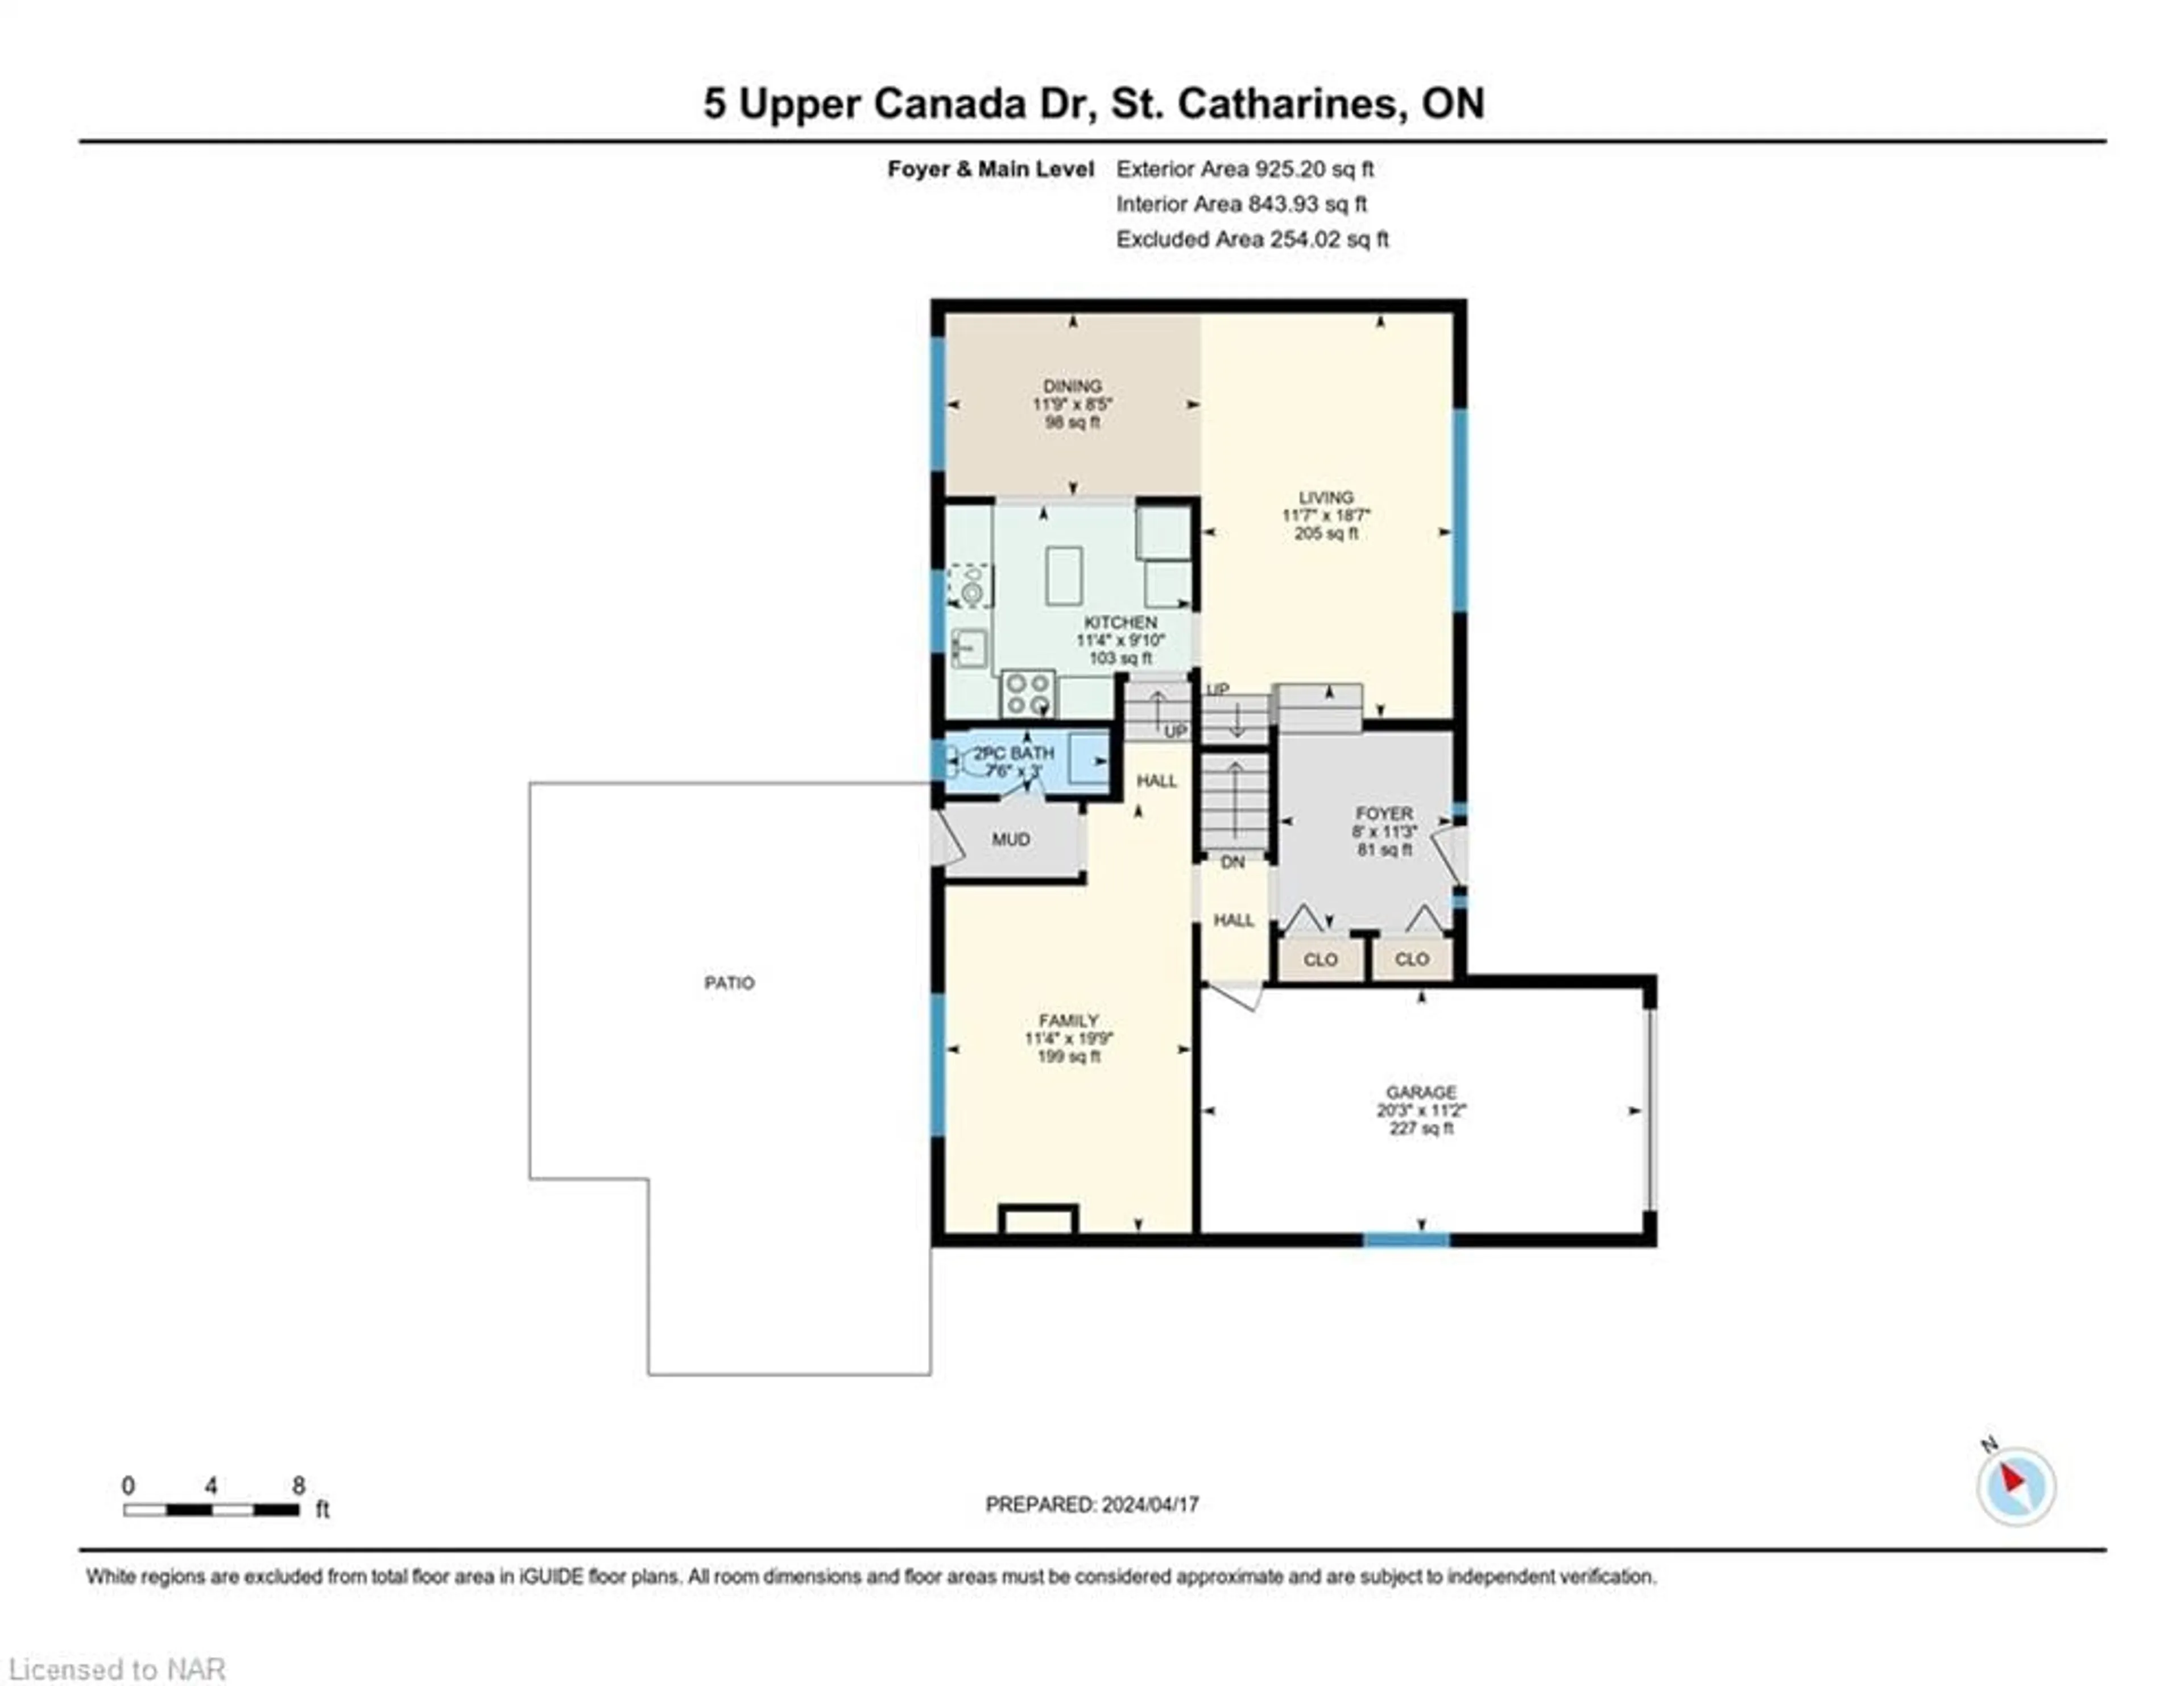 Floor plan for 5 Upper Canada Dr, St. Catharines Ontario L2N 3H3